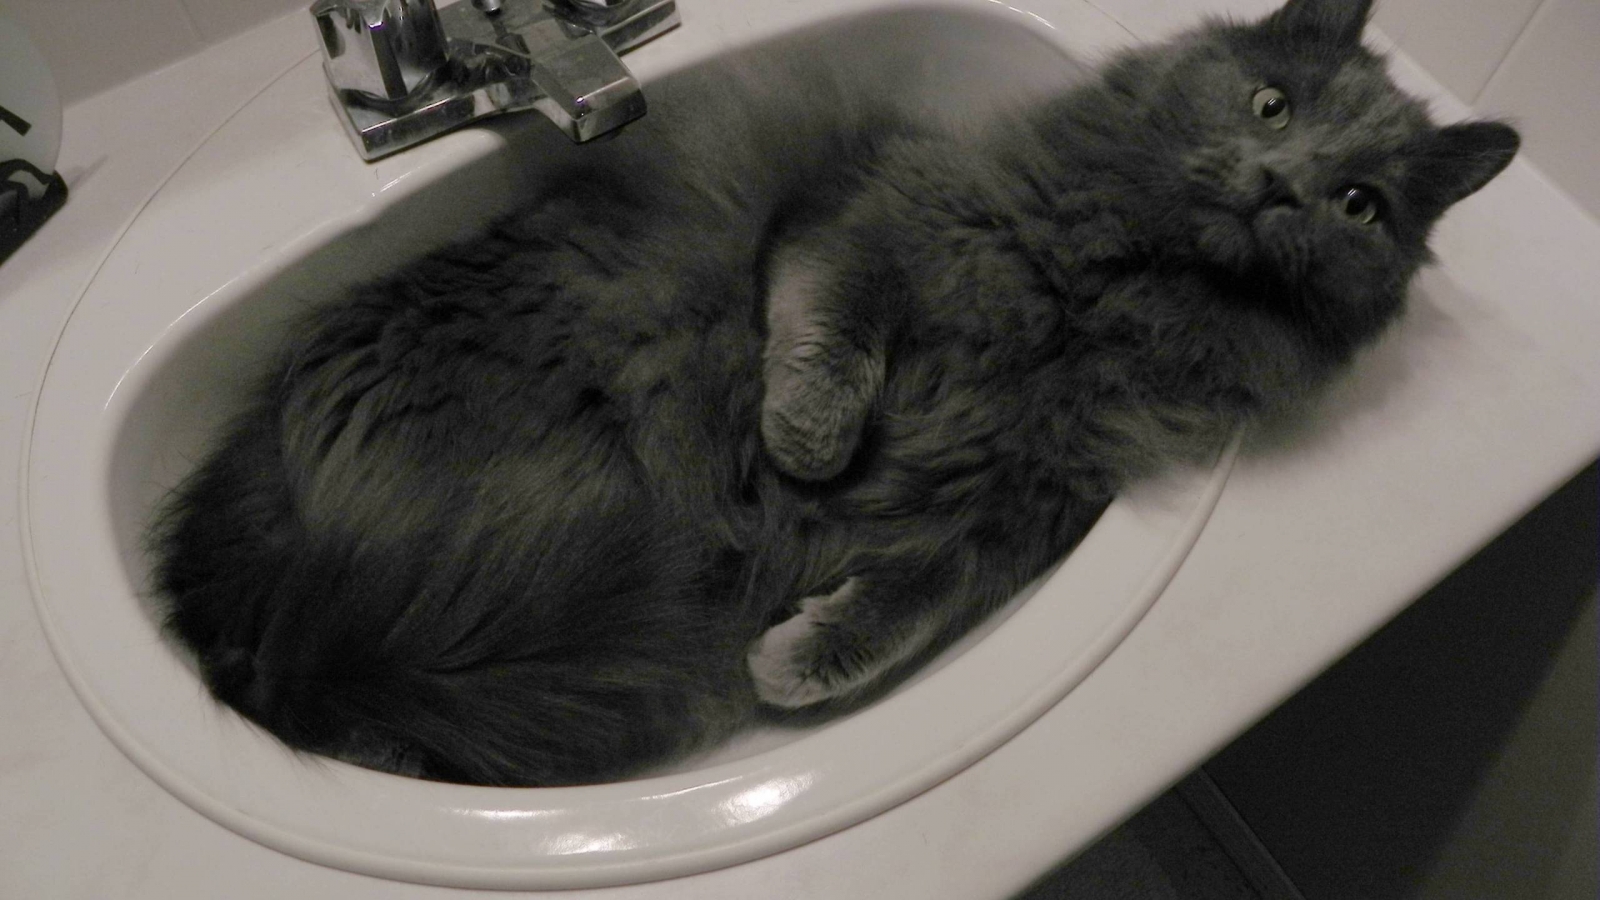 Nebelung Cat in Sink for 1600 x 900 HDTV resolution